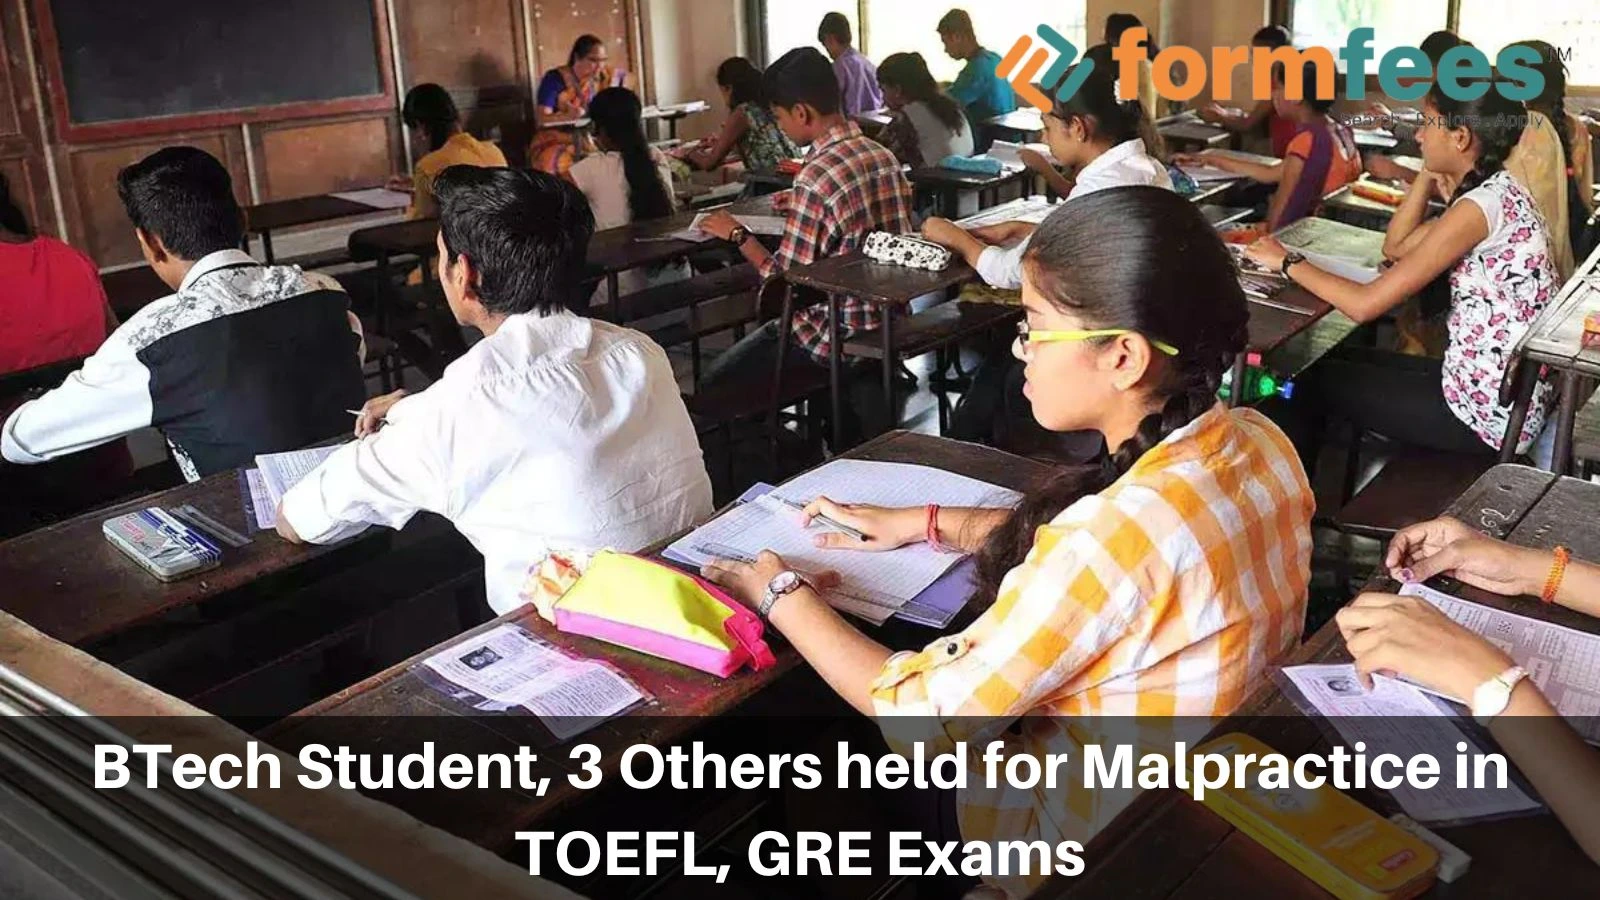 BTech Student, 3 Others held for Malpractice in TOEFL, GRE Exams